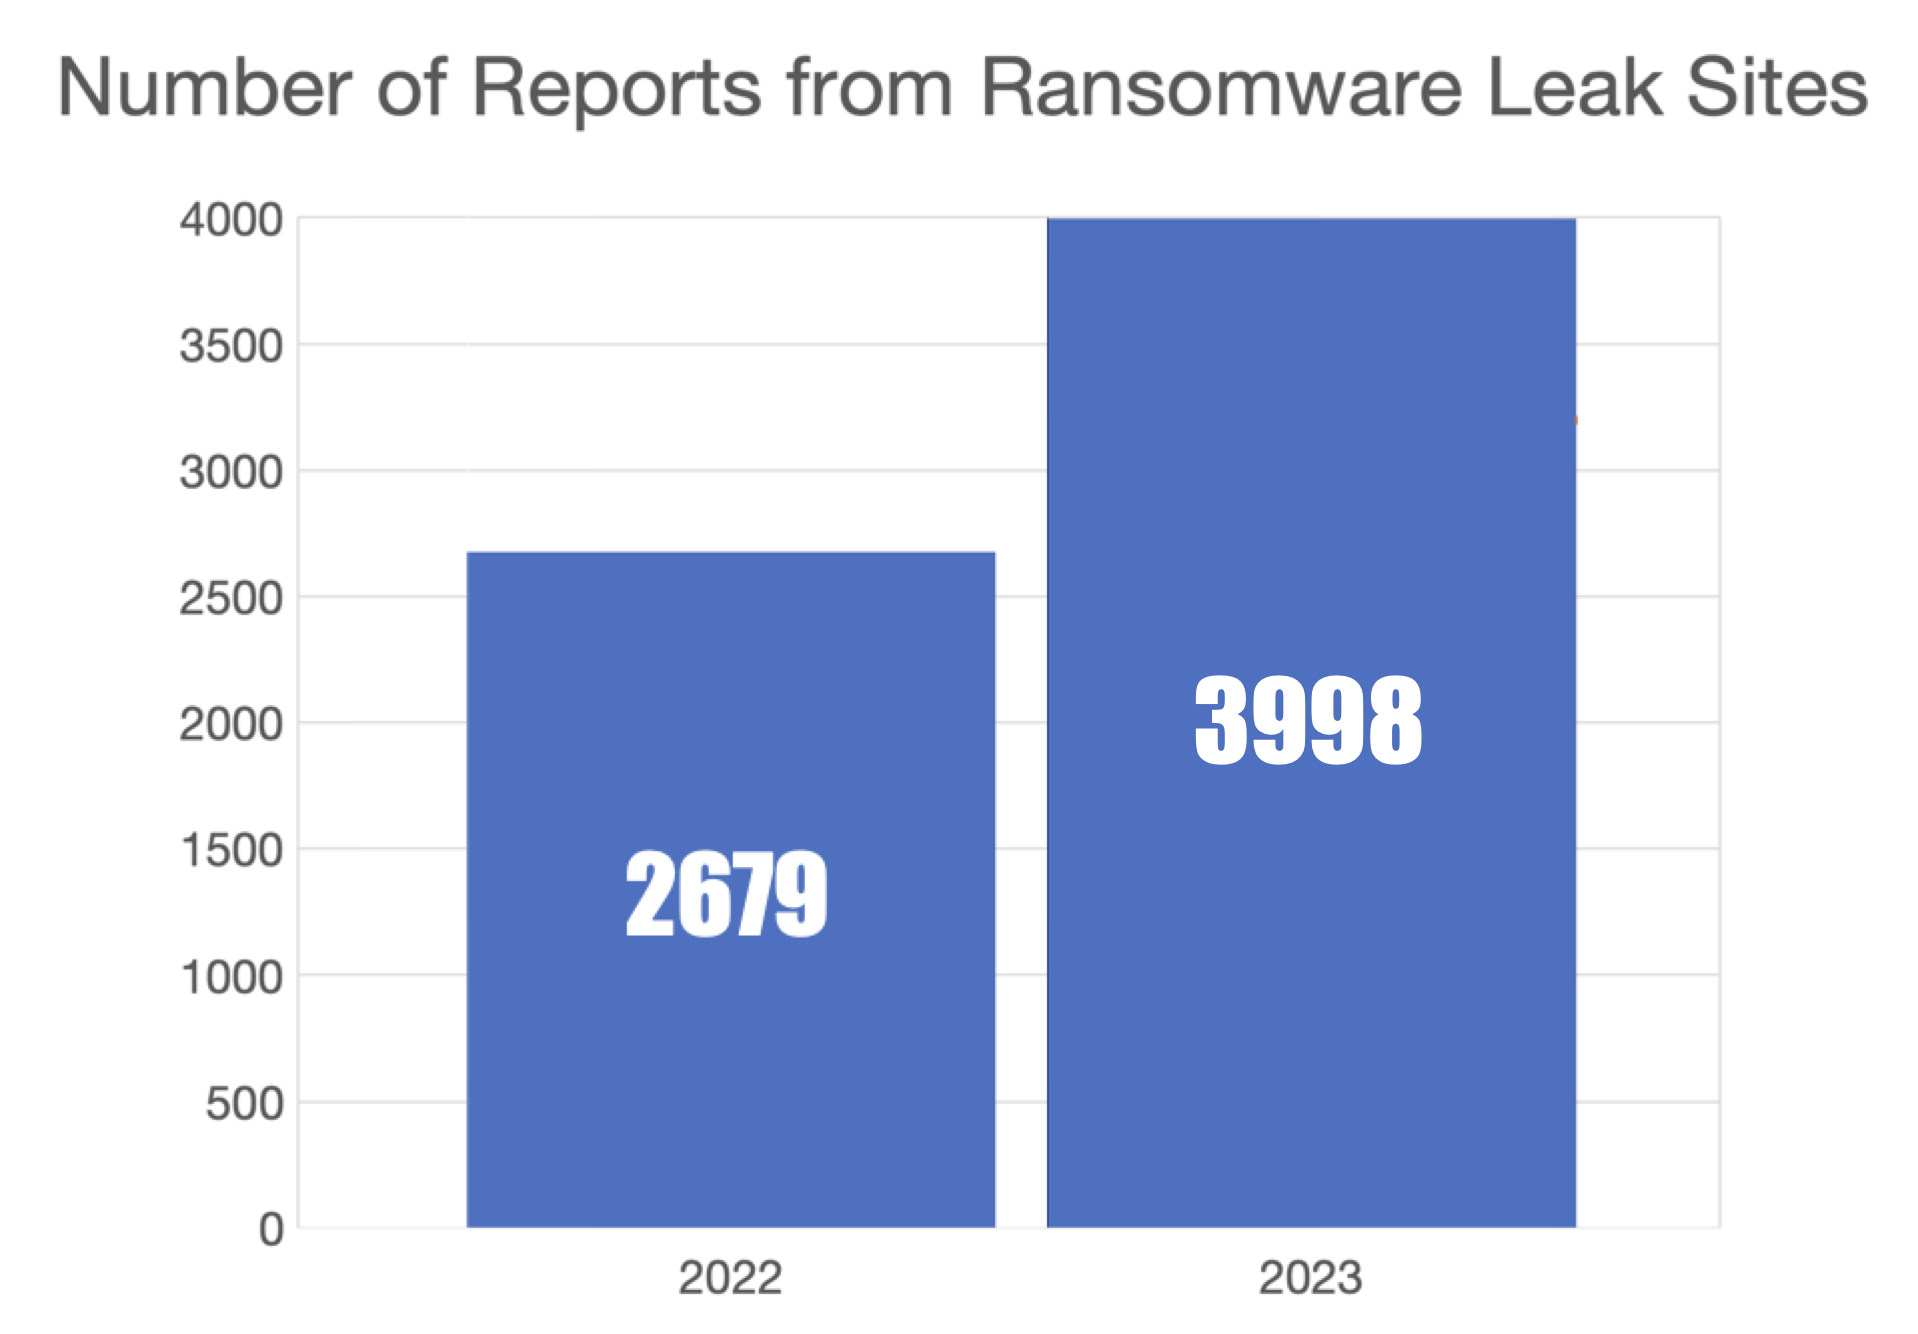 Image 1 is a column graph comparing ransomware leak site reports from 2022 to 2023. There were 2,679 instances in 2022. There were 3,998 in 2023. 